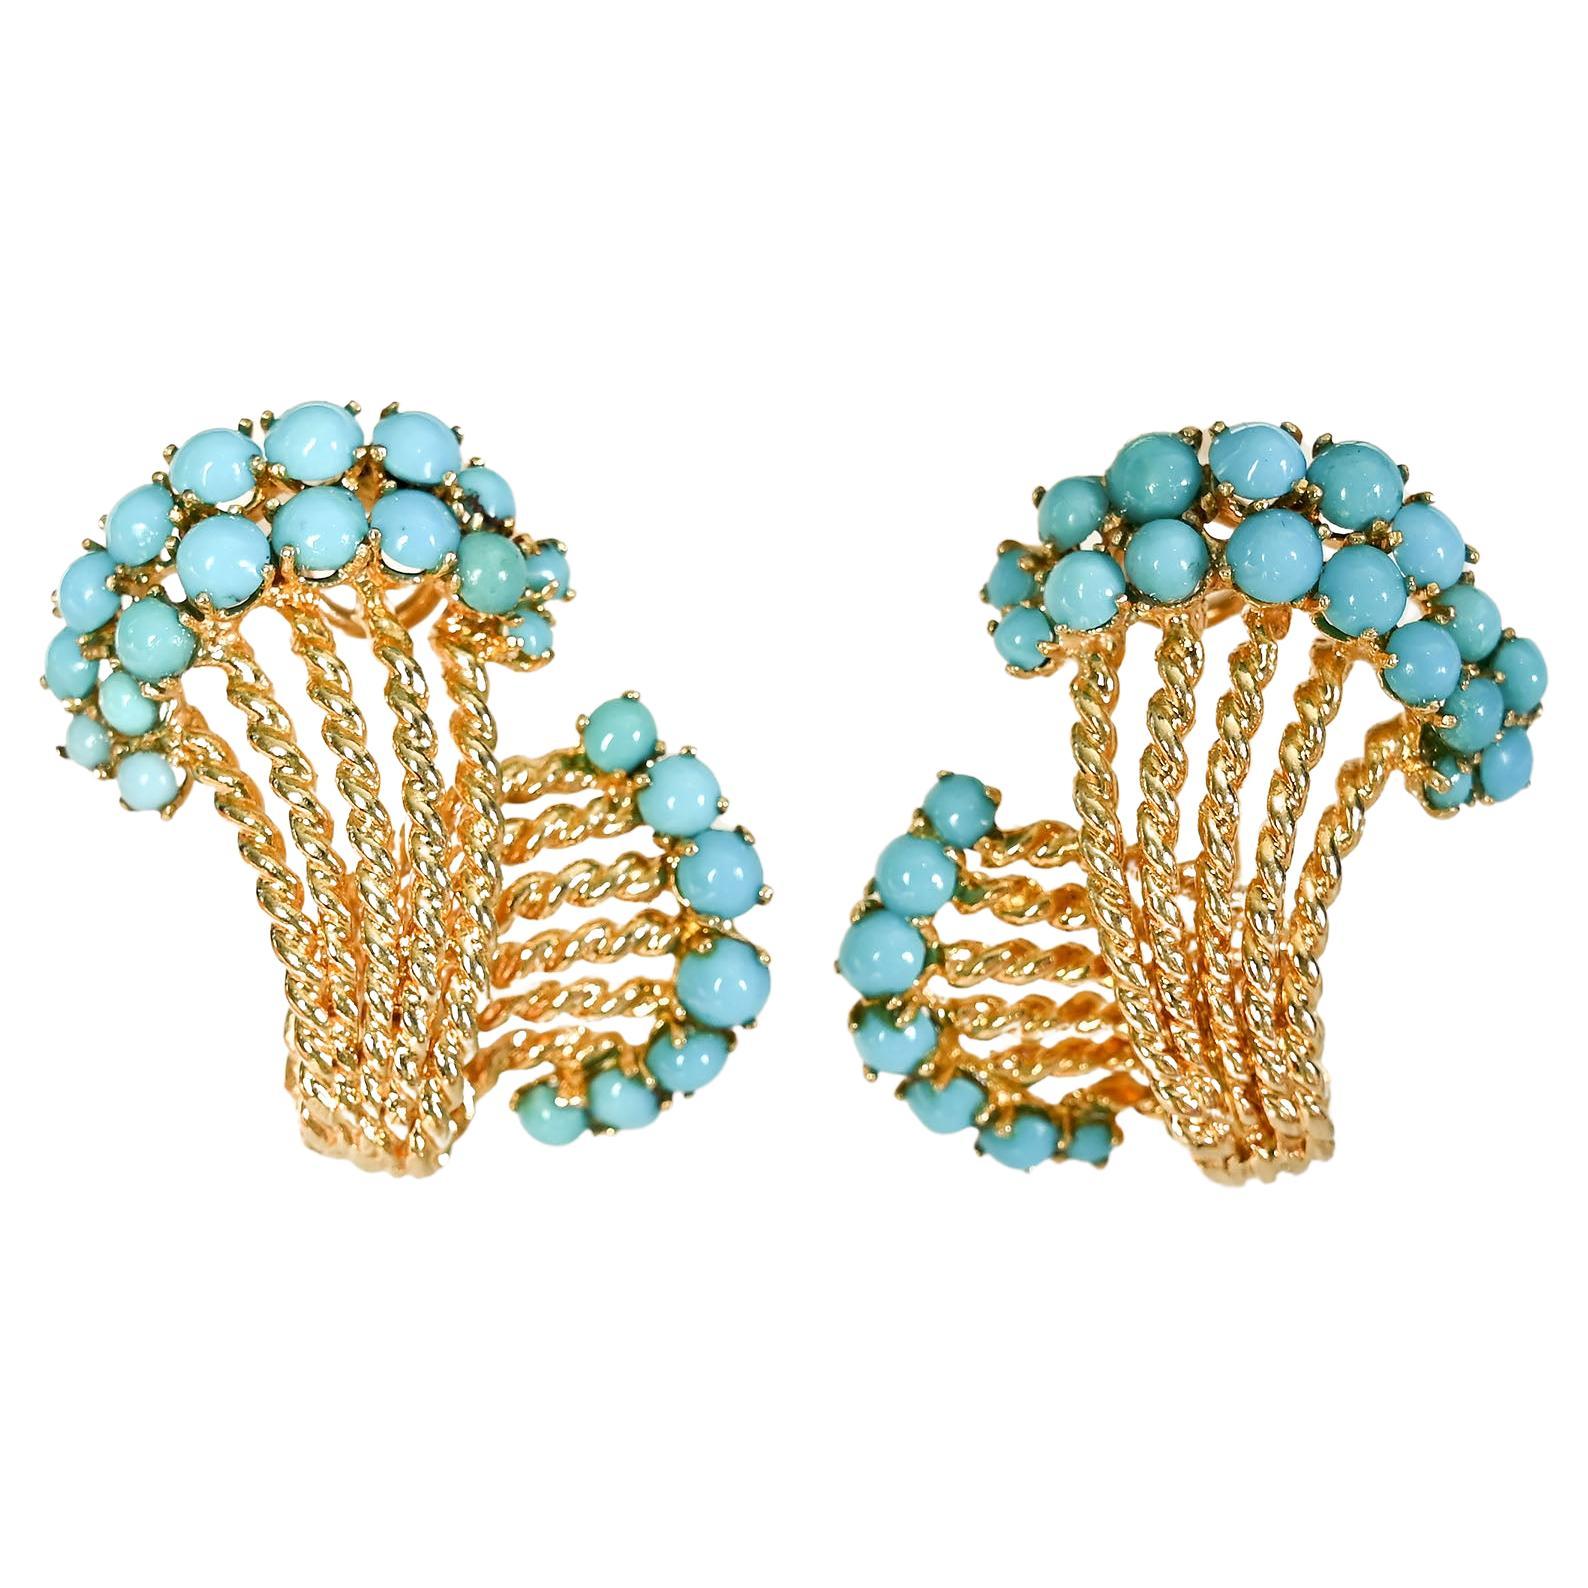 Gold Spray Earrings with Turquoise